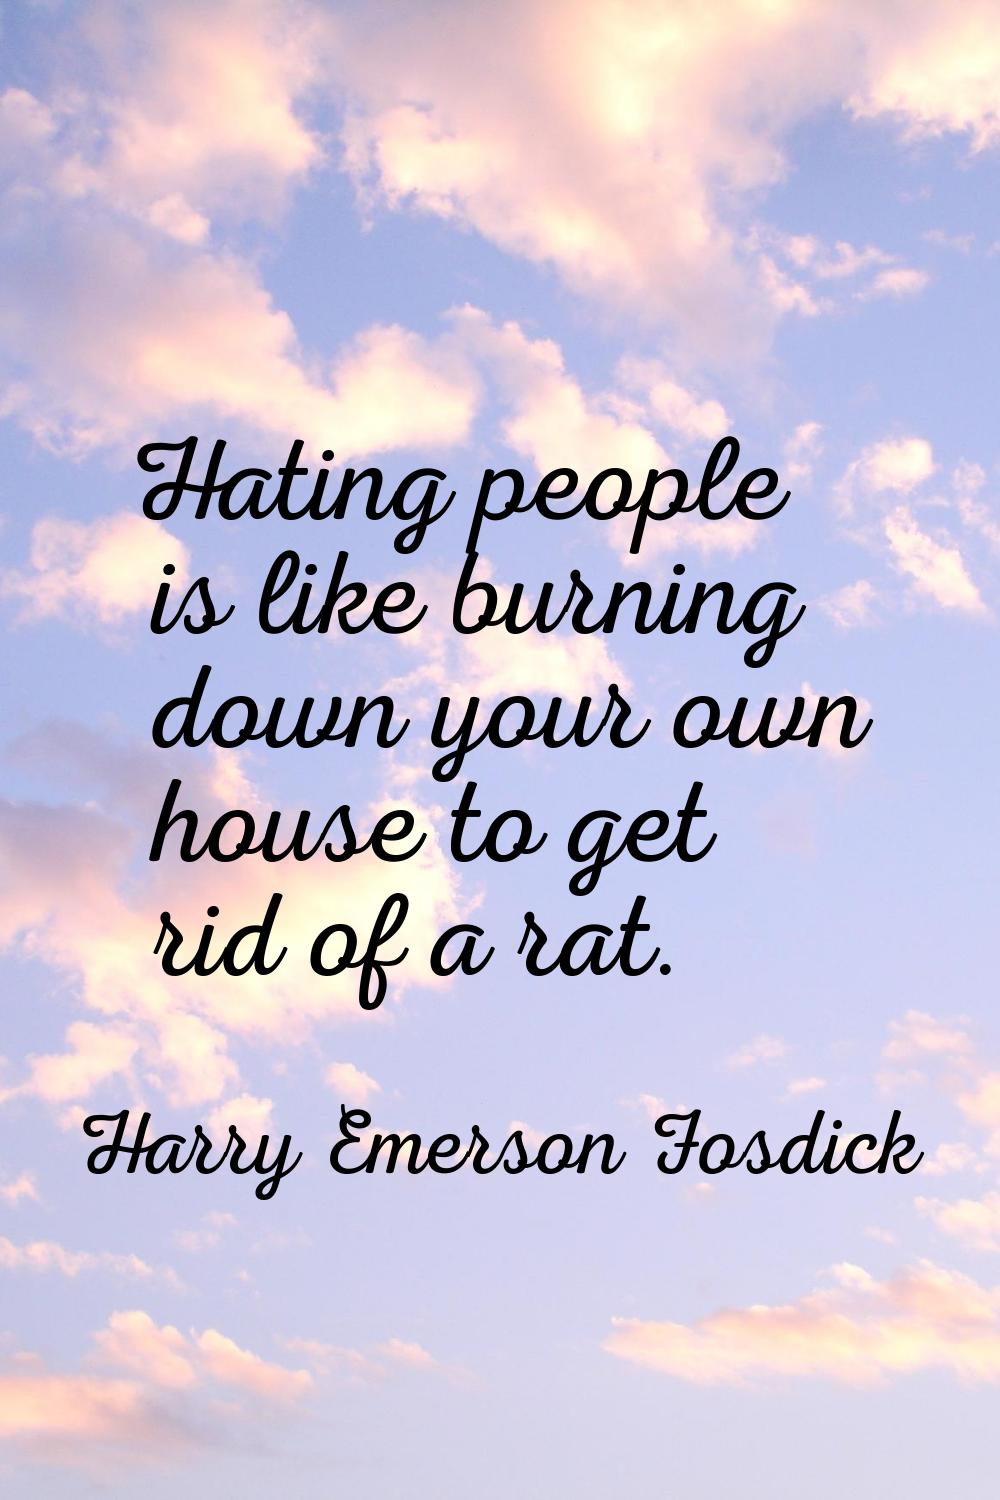 Hating people is like burning down your own house to get rid of a rat.